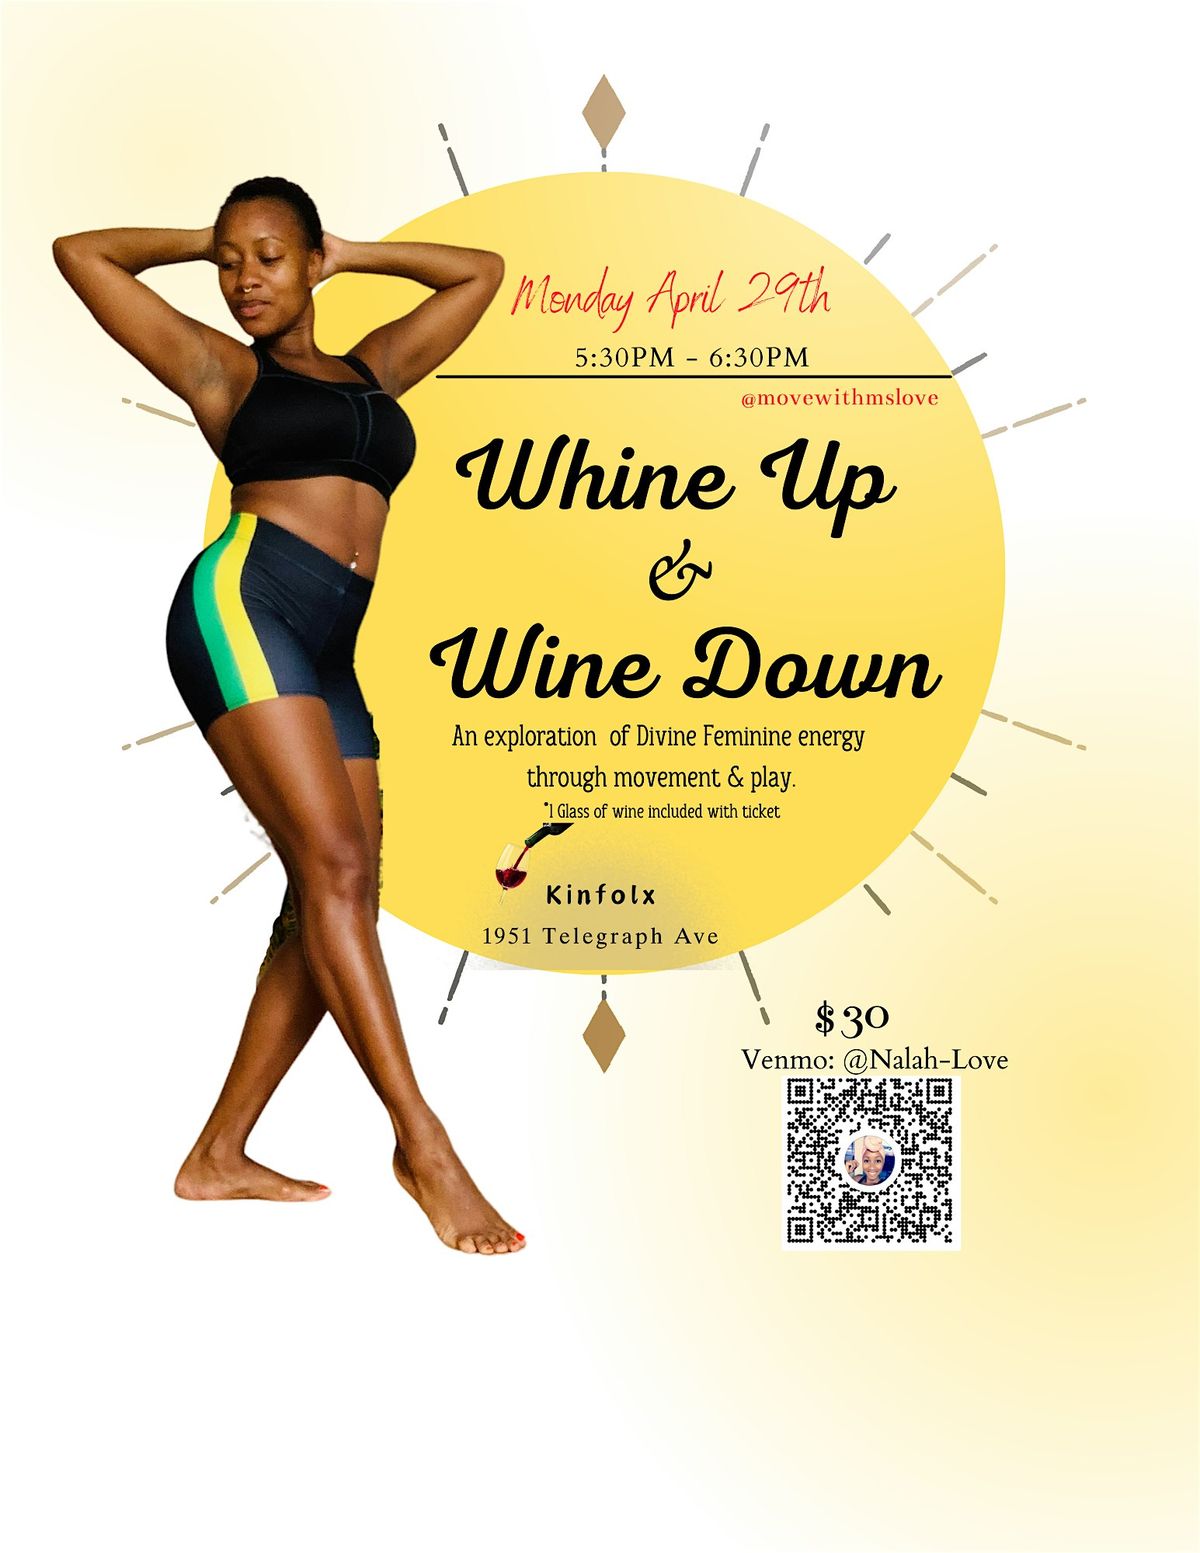 Whine Up & Wine Down